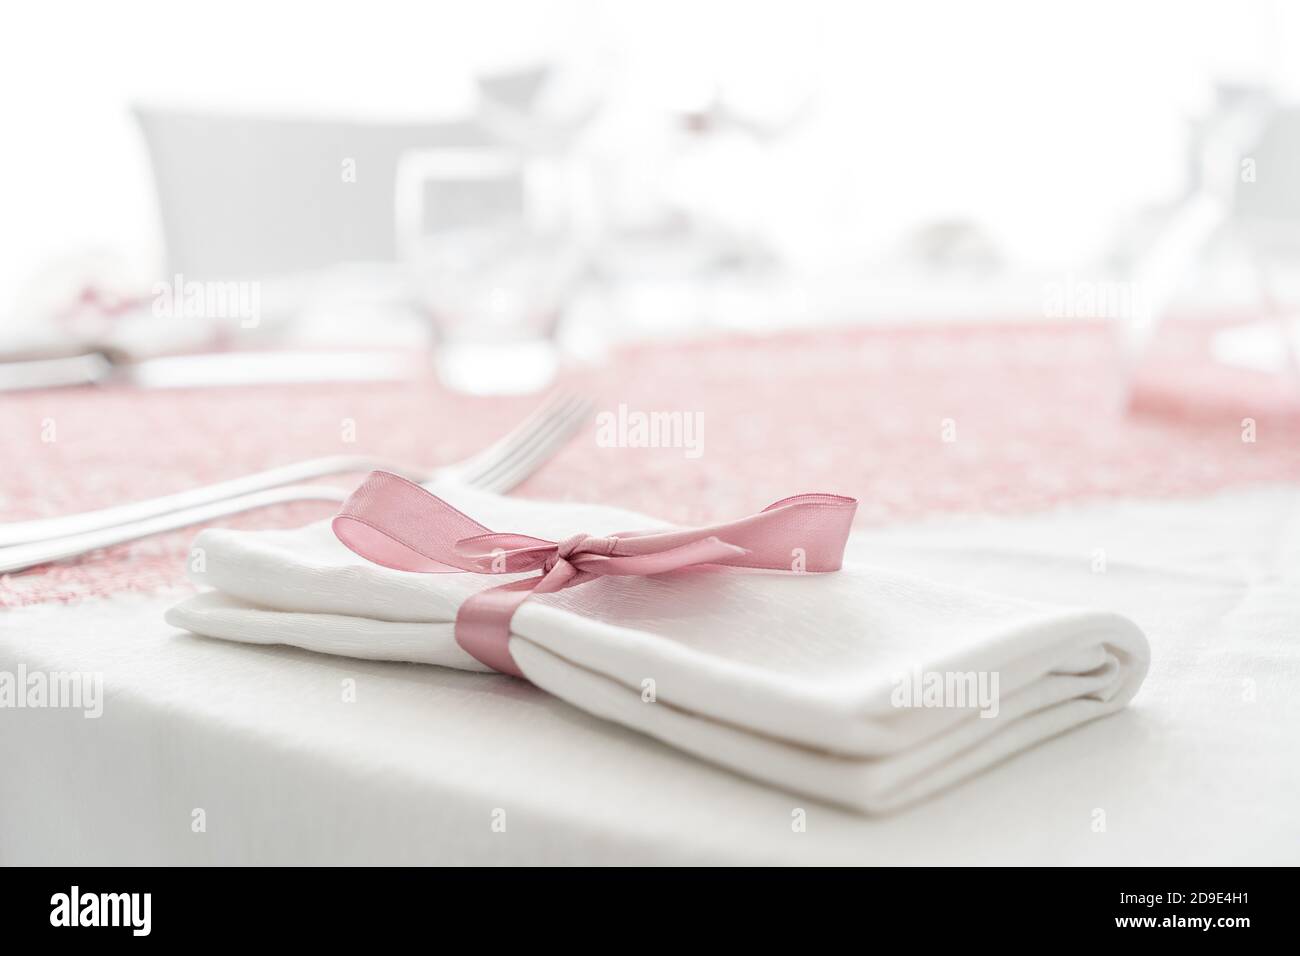 estive table. Plates and cutlery with pink napkin on a white background. Table setting. background for menu, layout, recipe background, food flat lay. Stock Photo